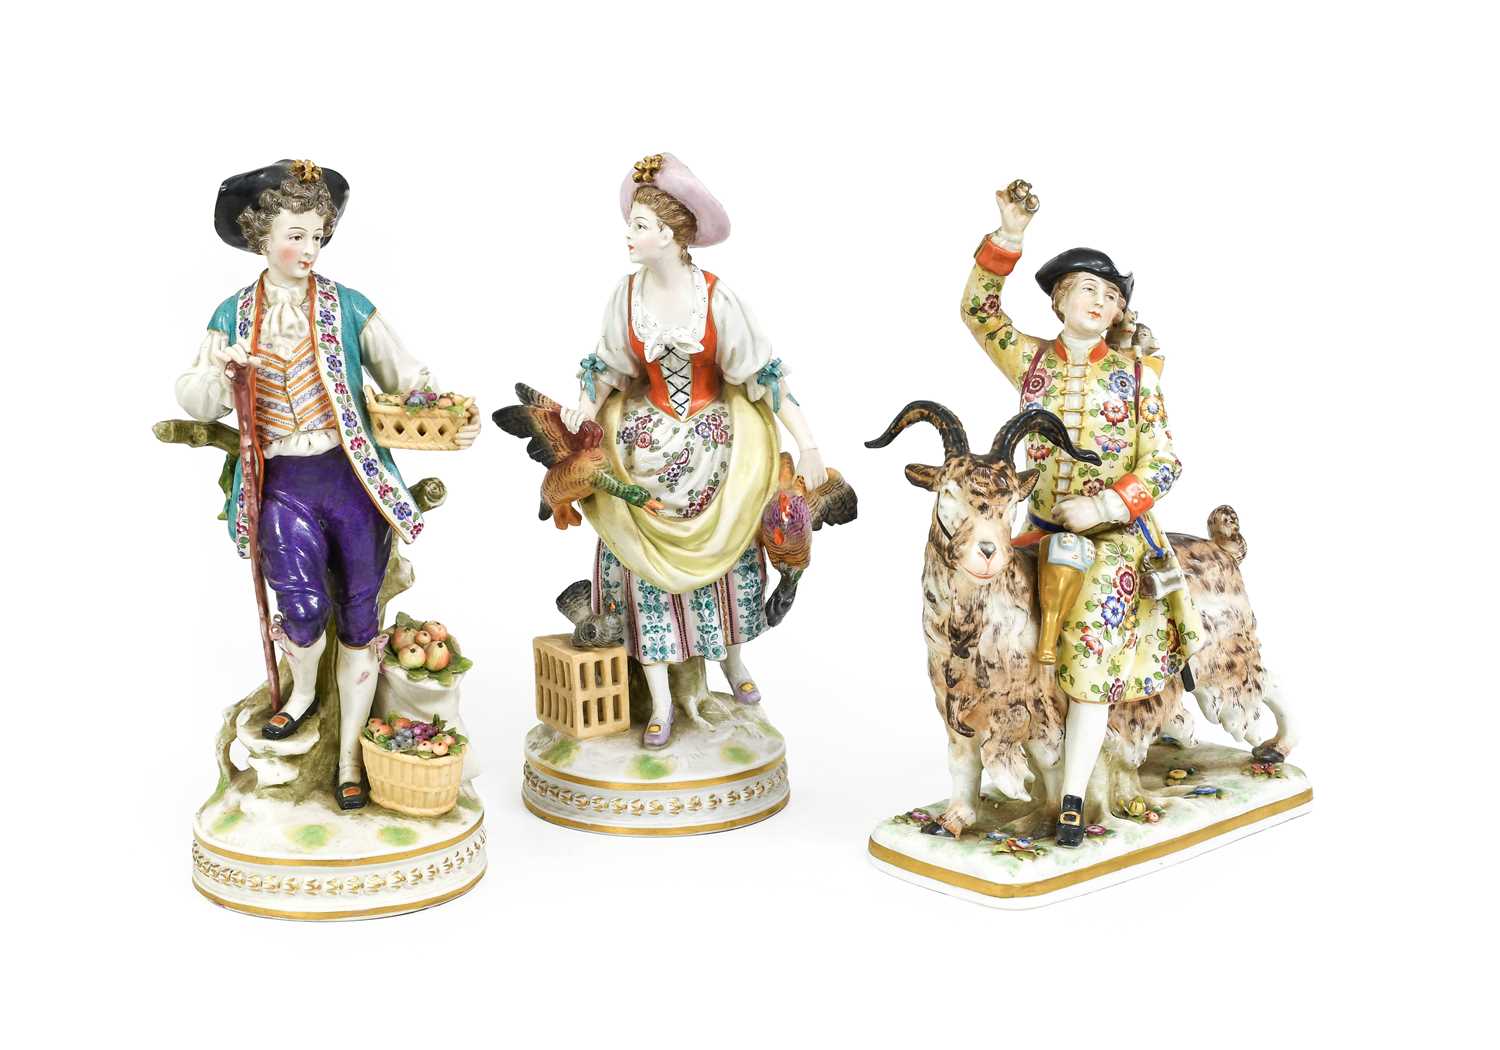 A Pair of Sitzendorf Porcelain Figural Candlesticks, 19th century, a young man harvesting corn - Image 2 of 4